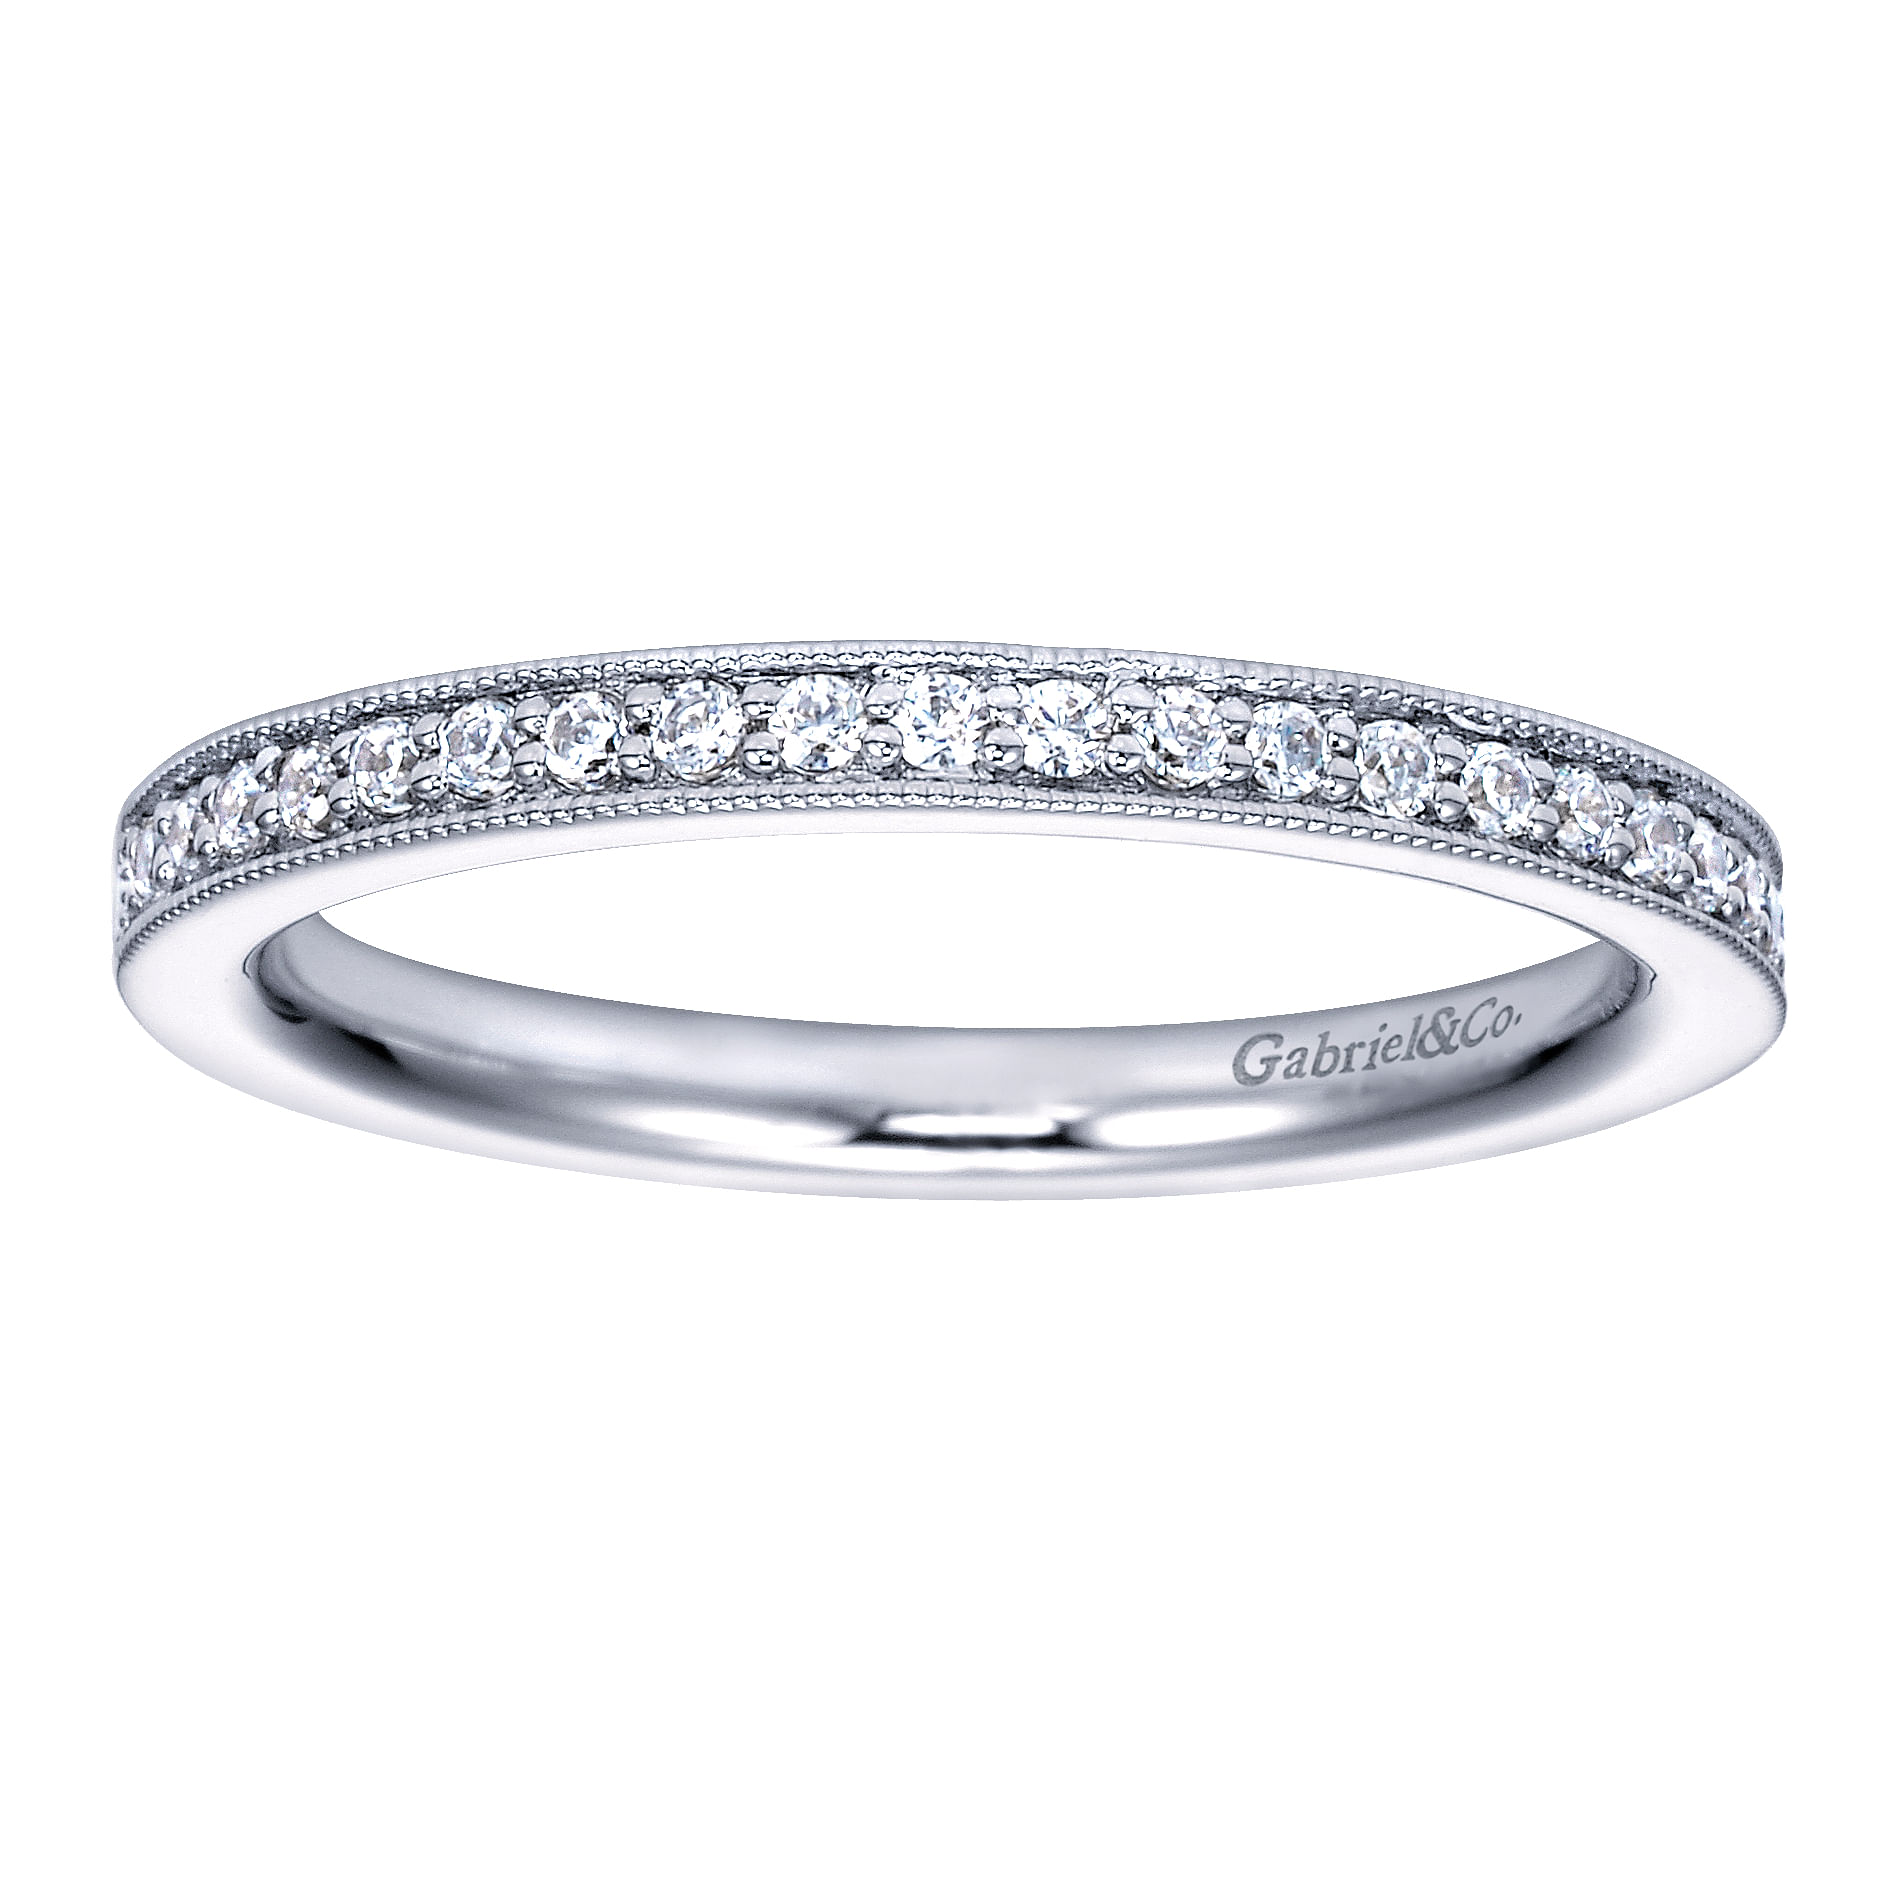 14K White Gold Channel Prong Diamond Wedding Band with Milgrain